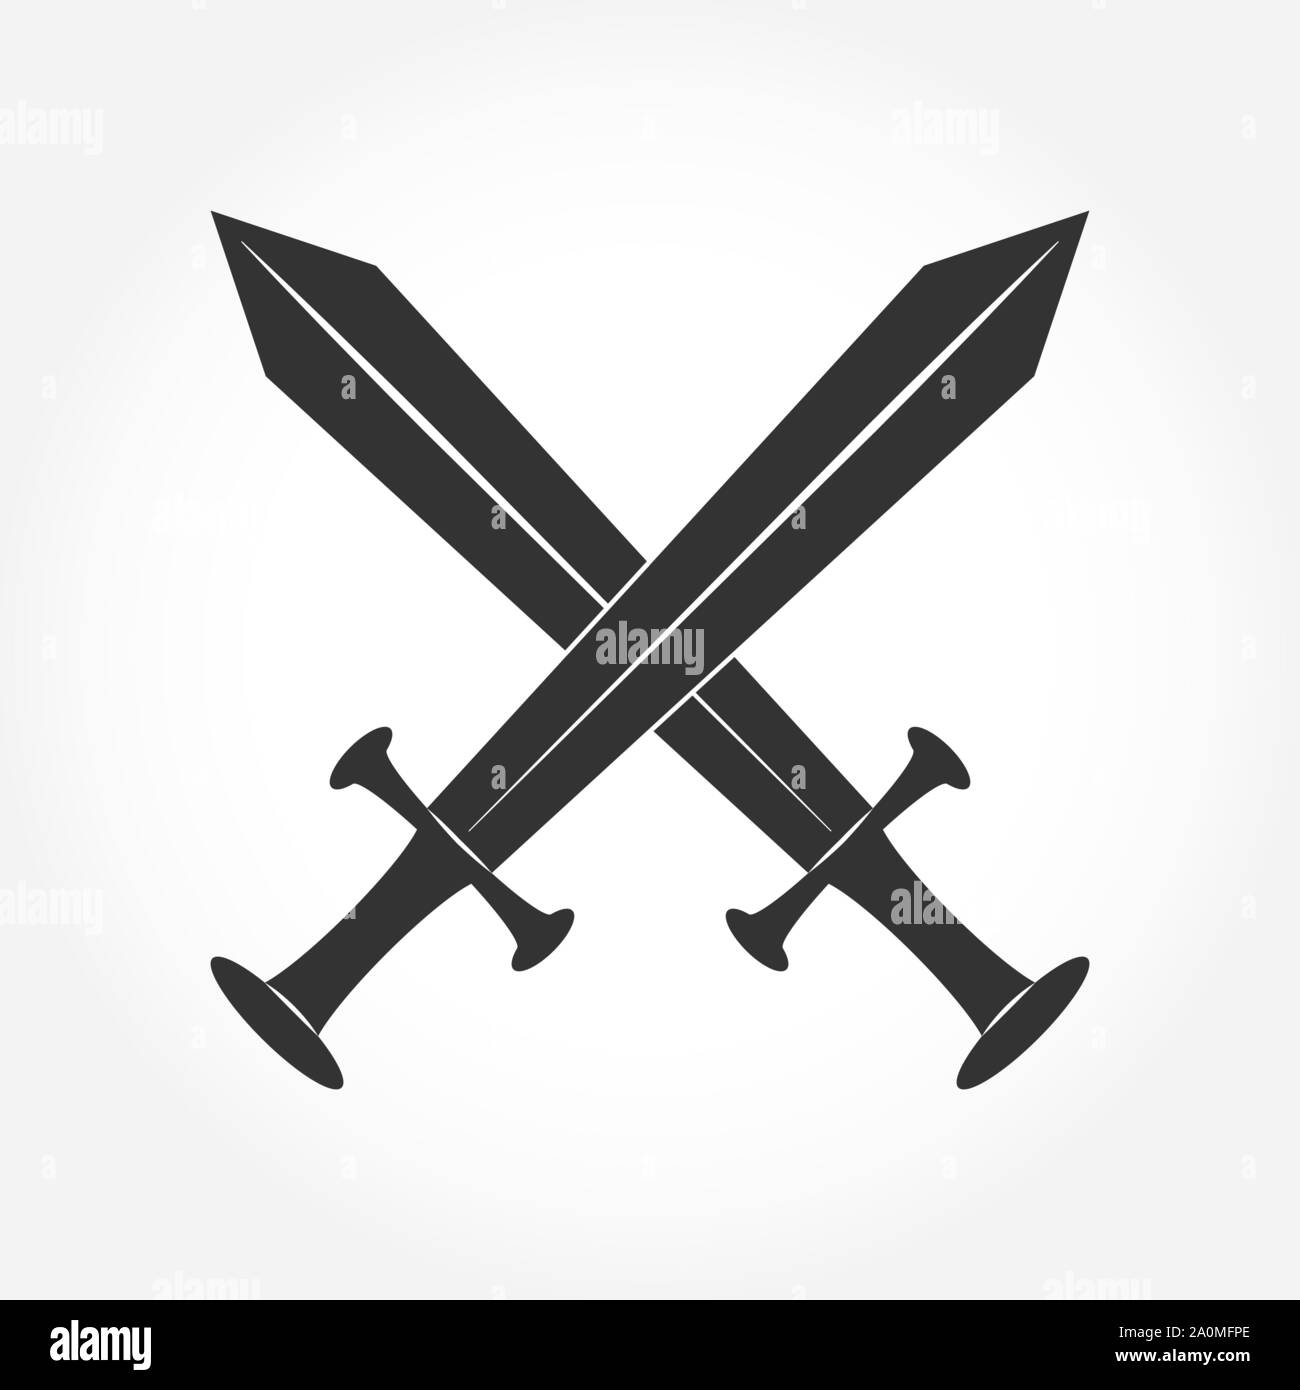 Two crossed ancient swords. Flat simple design. Stock Vector